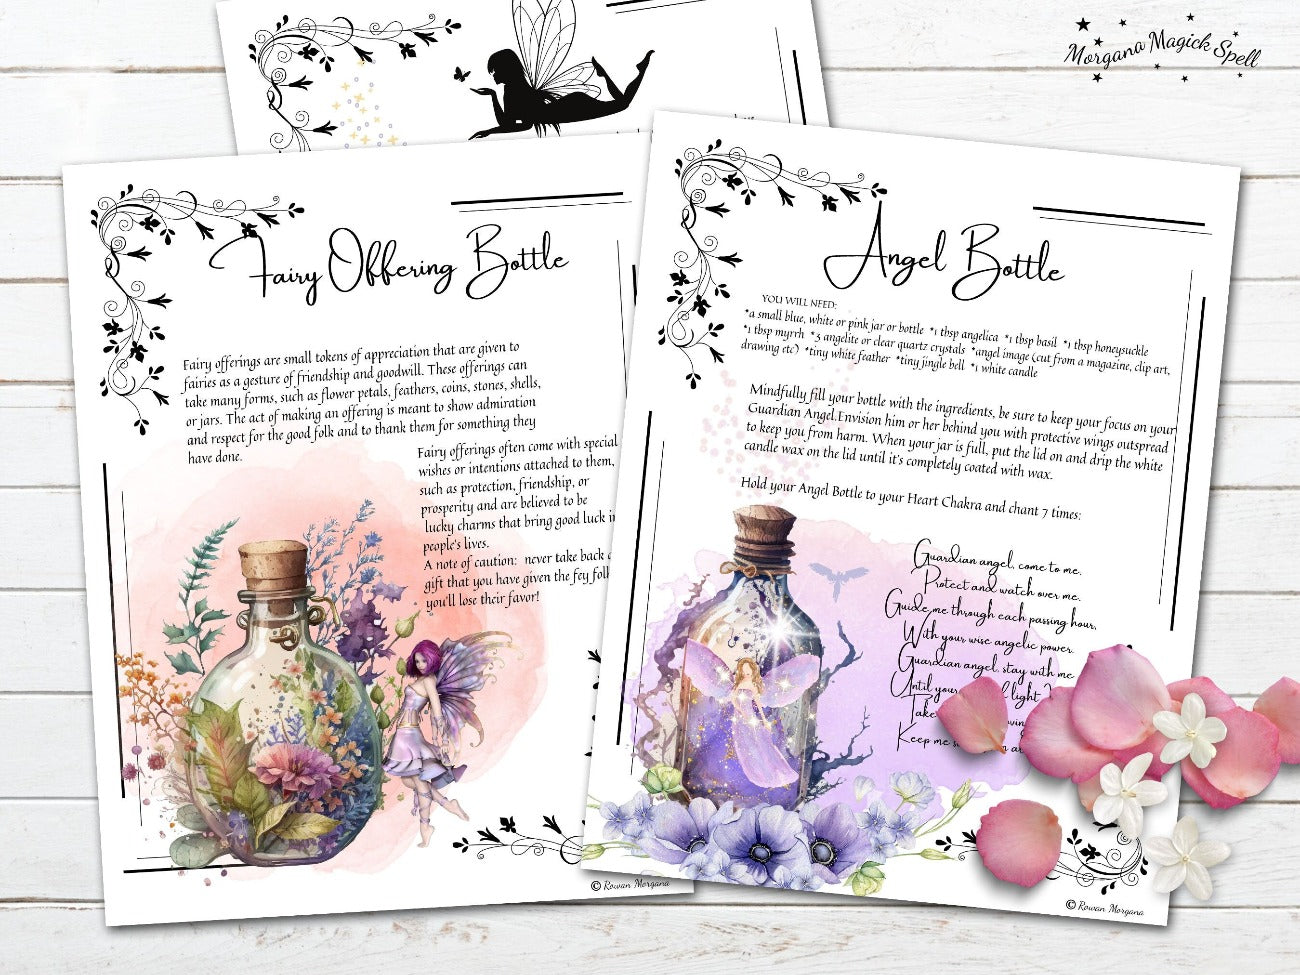 Wicca Witchcraft Spell Bottle Recipes printable bundle by Morgana Magick Spell.